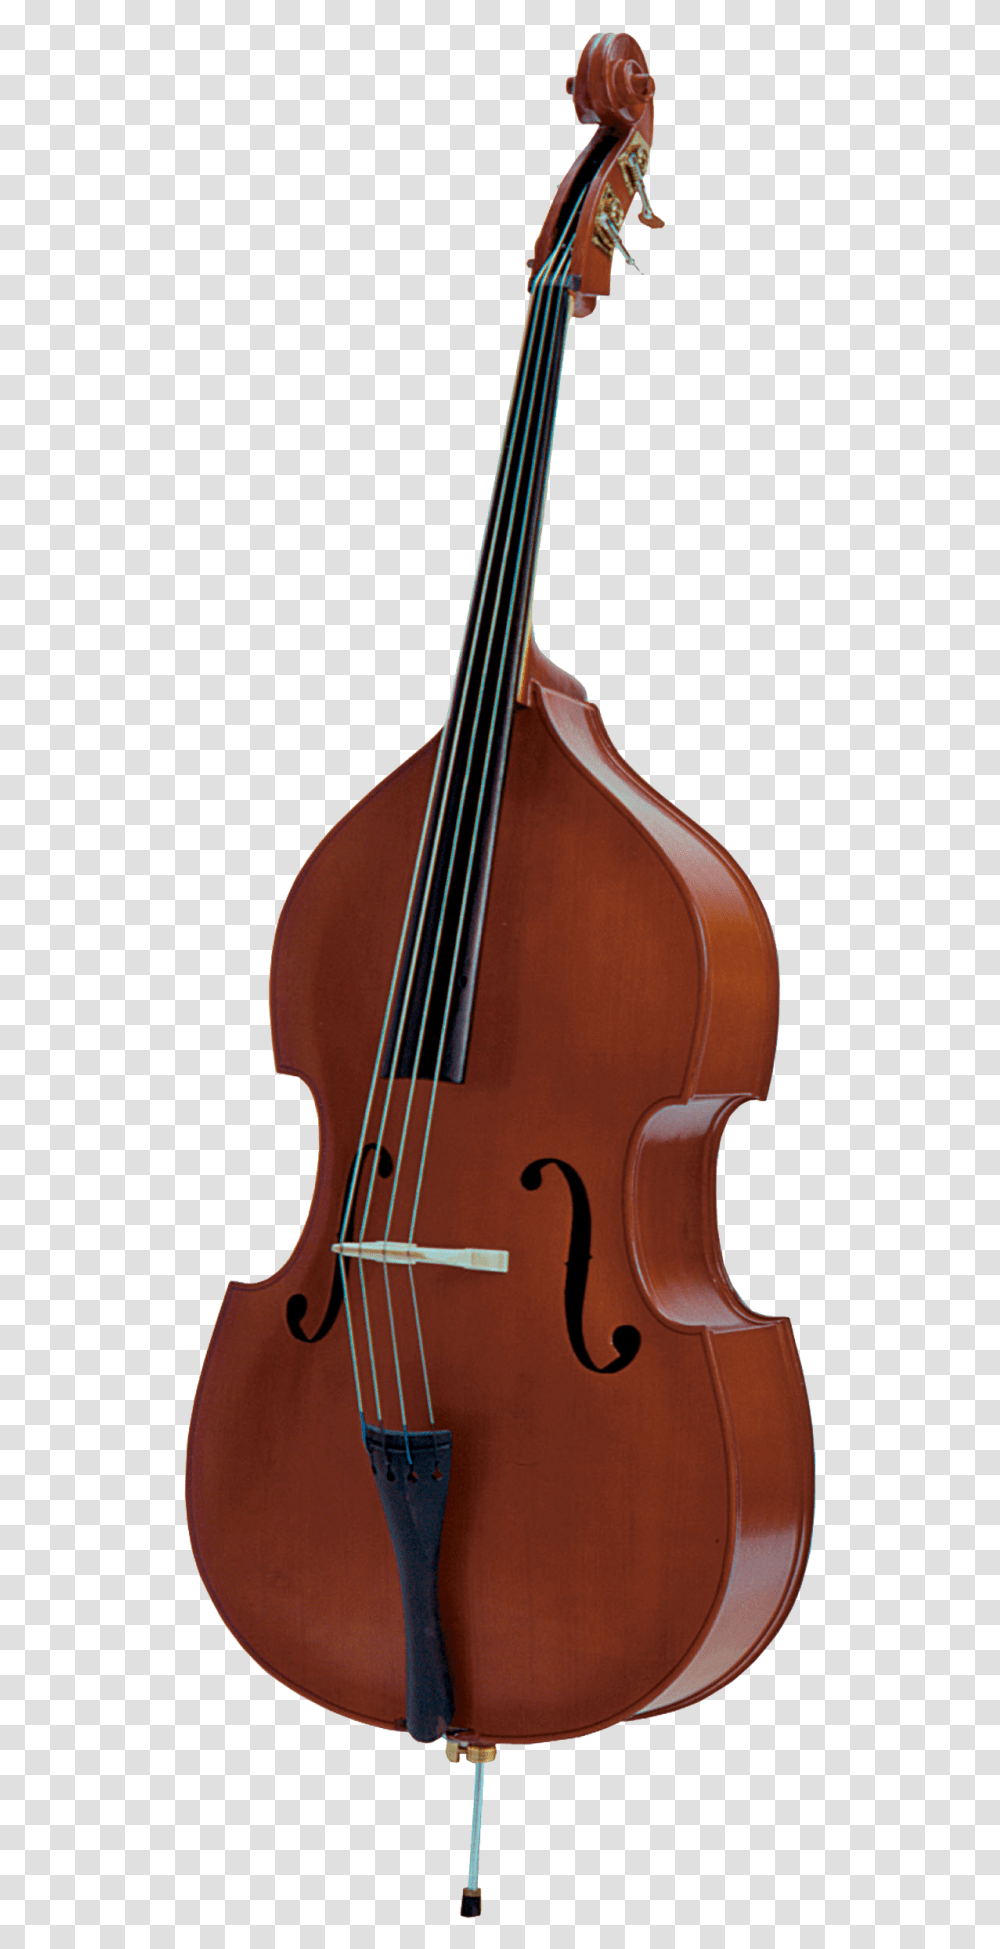 Double Bass Bass Guitar String Instruments Electric Palatino Vb, Musical Instrument, Cello, Mandolin Transparent Png